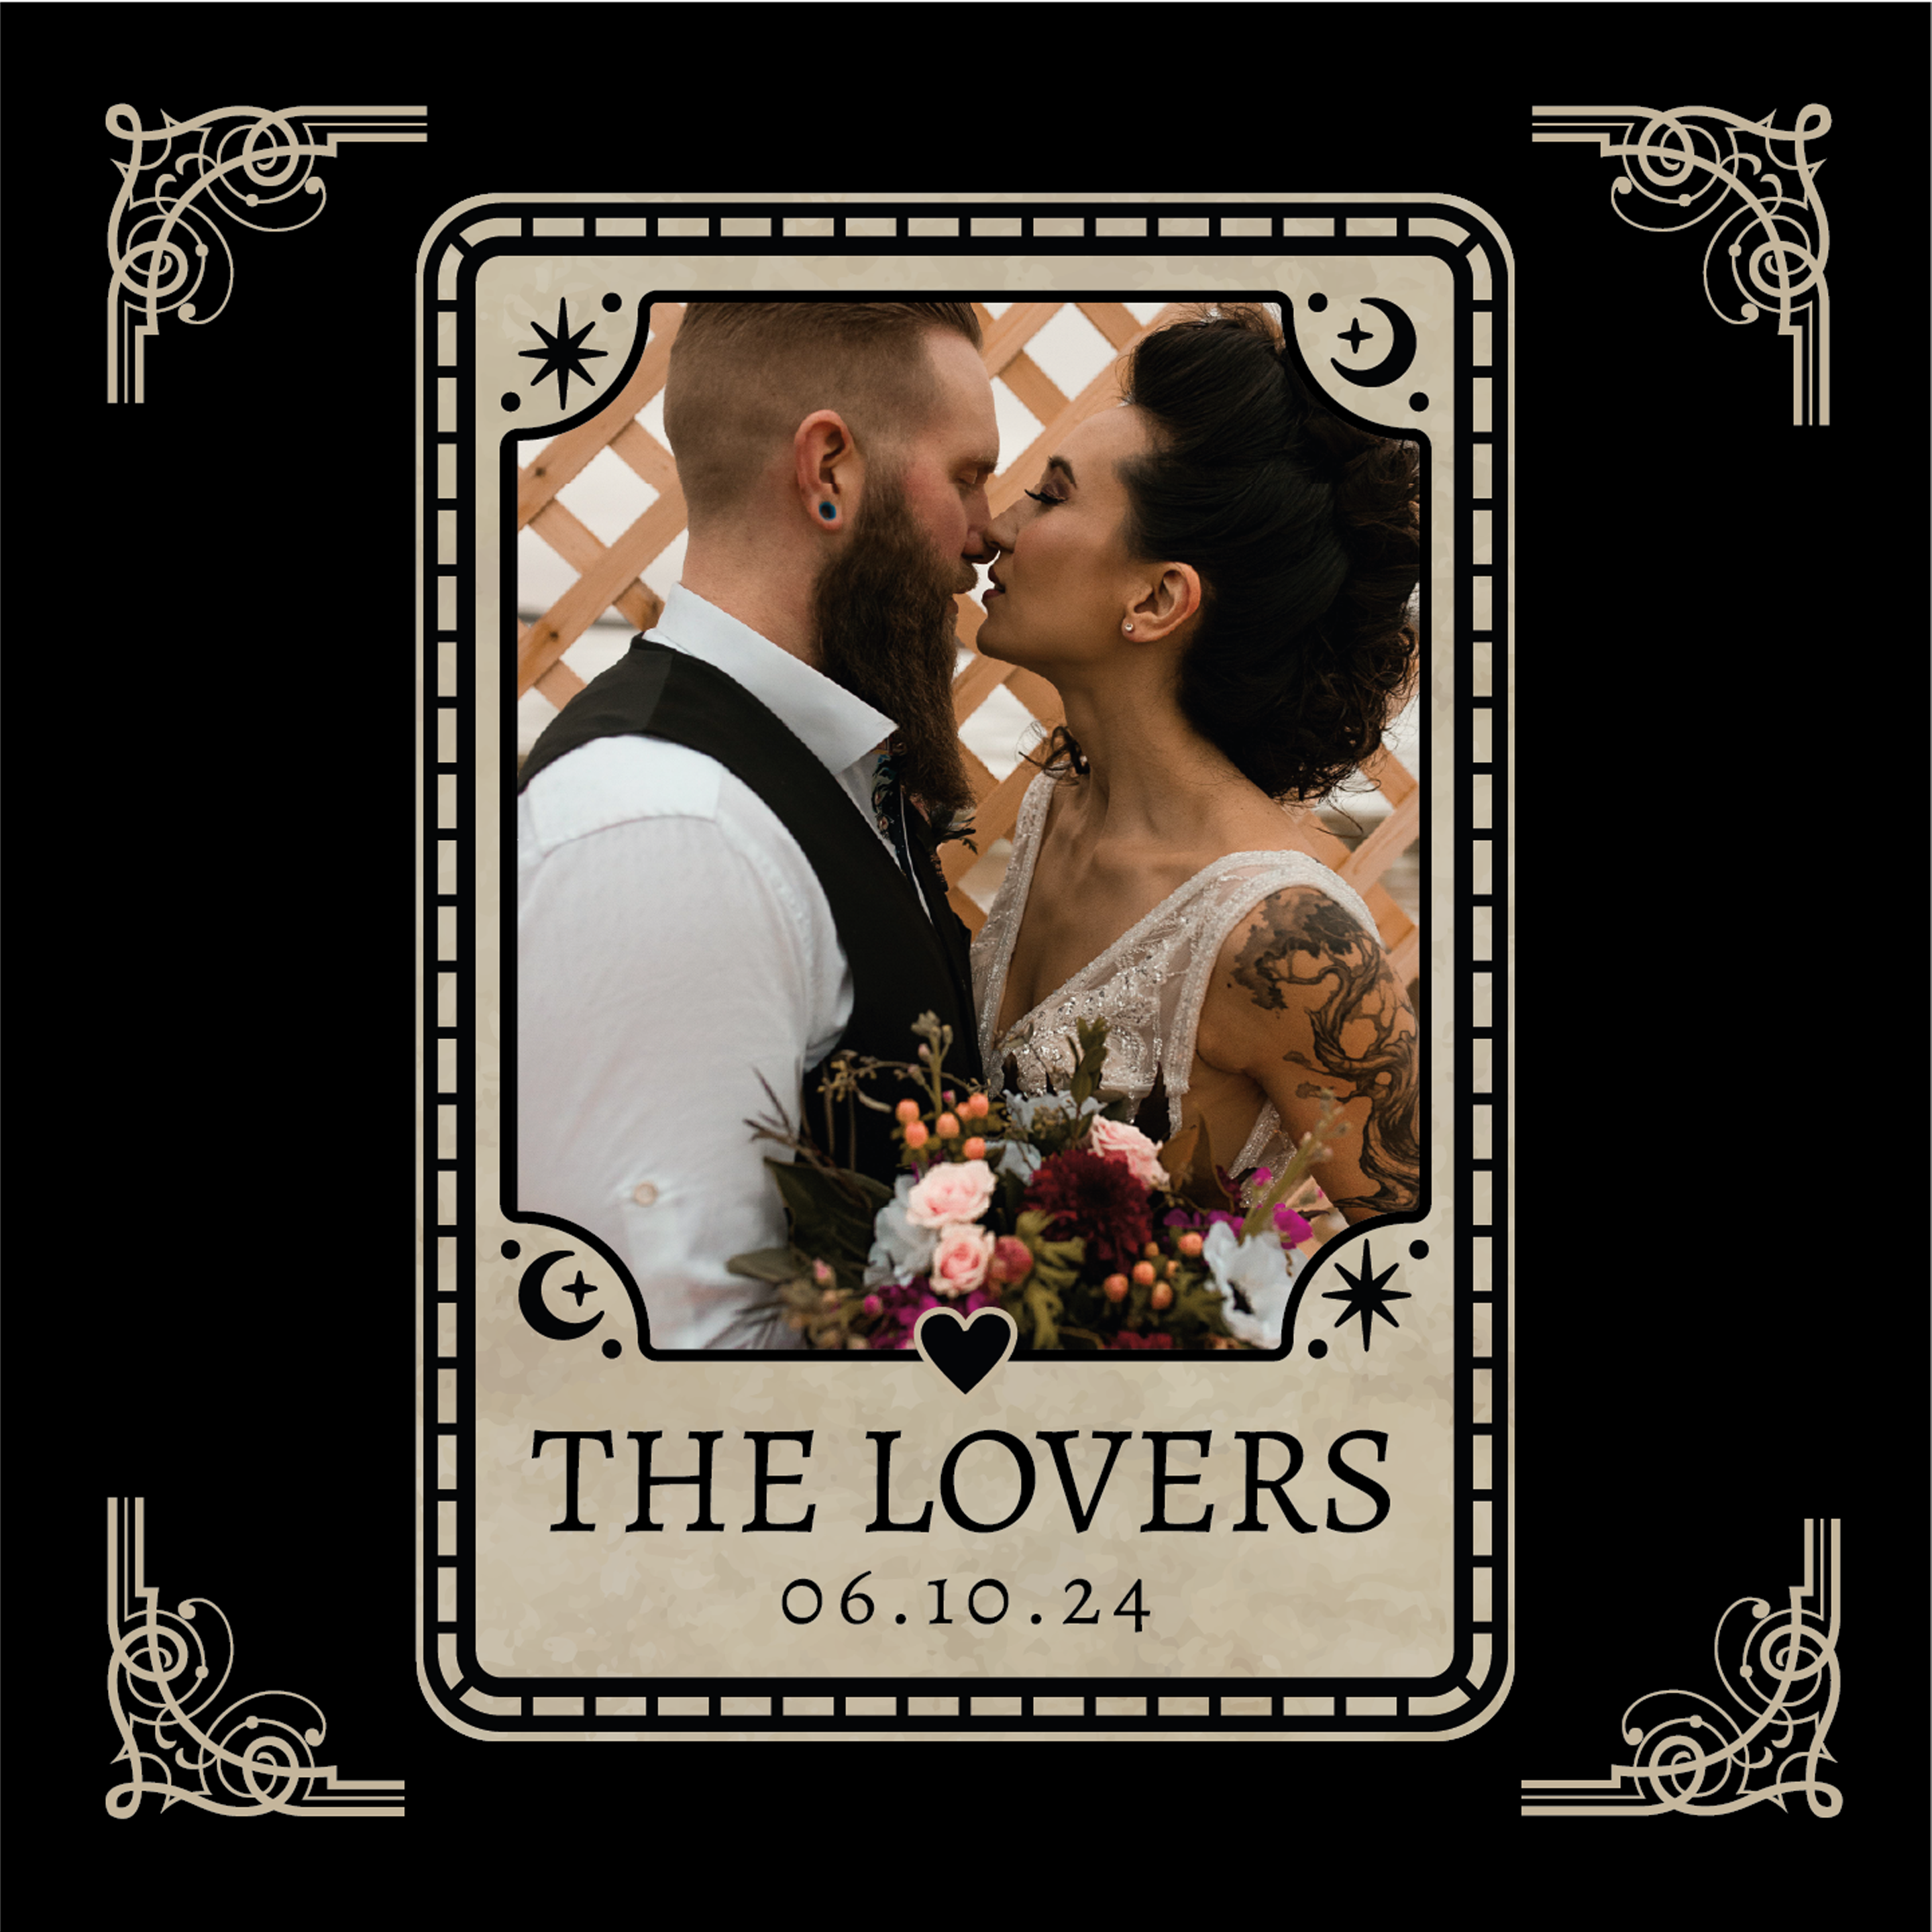 the-lovers-card-photo-upload-design-theme